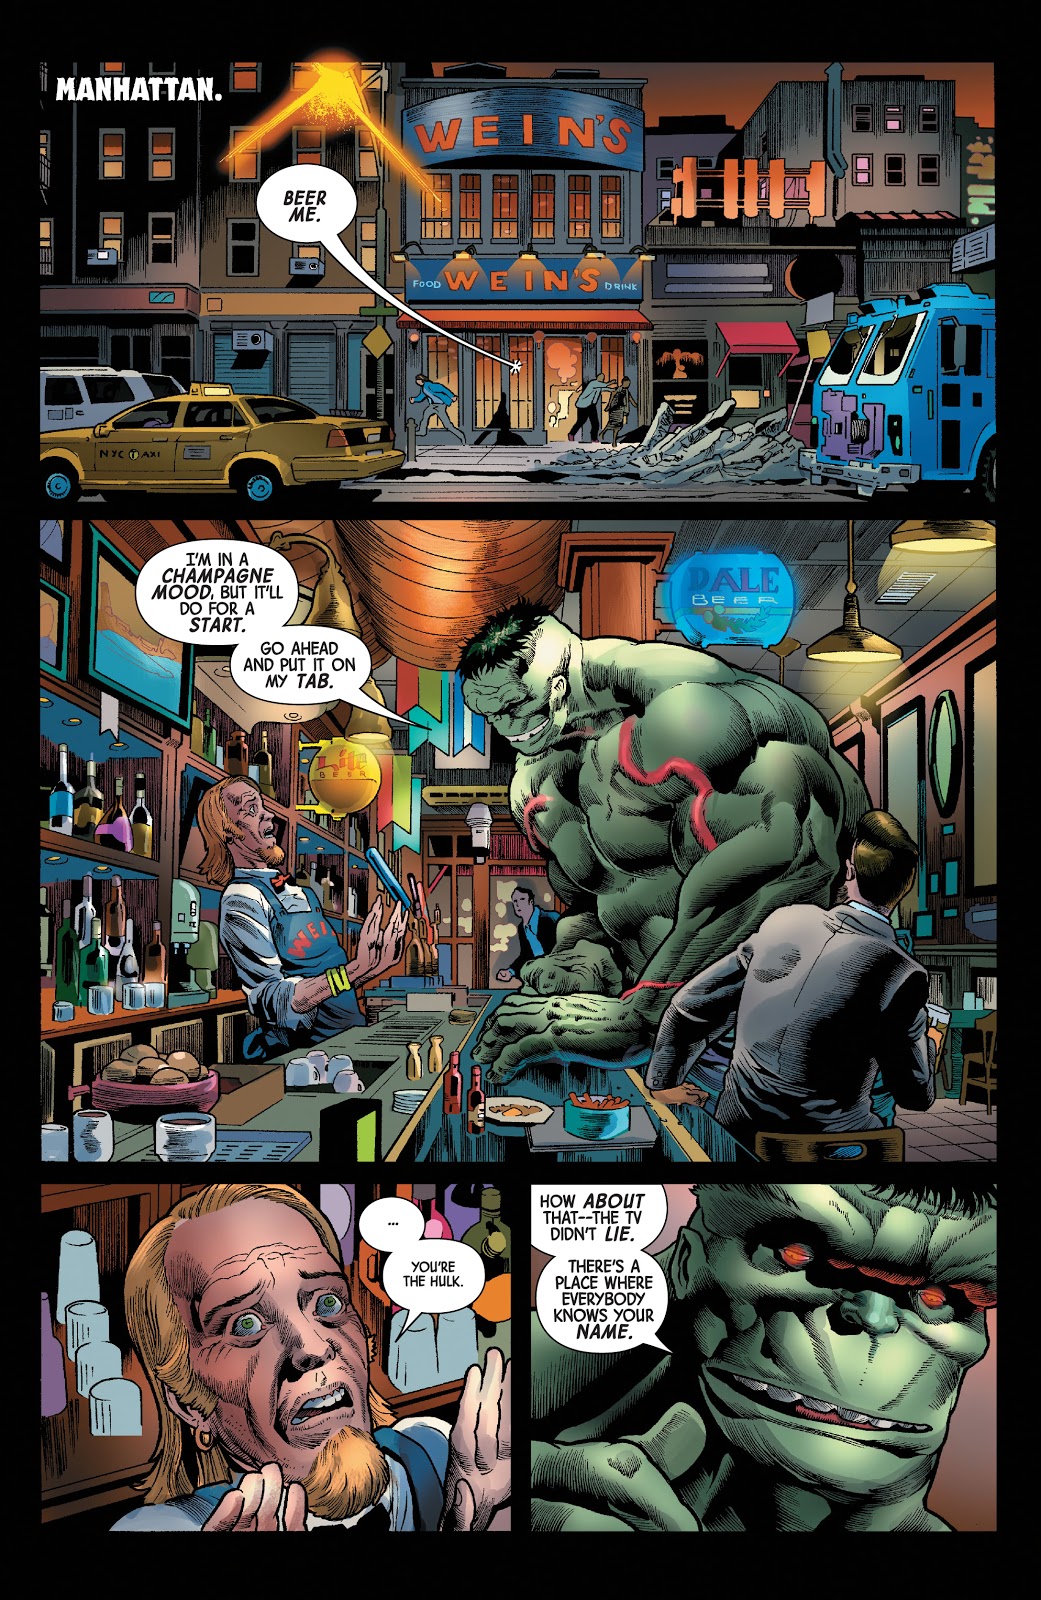 Immortal Hulk V10 of Hell and Death review